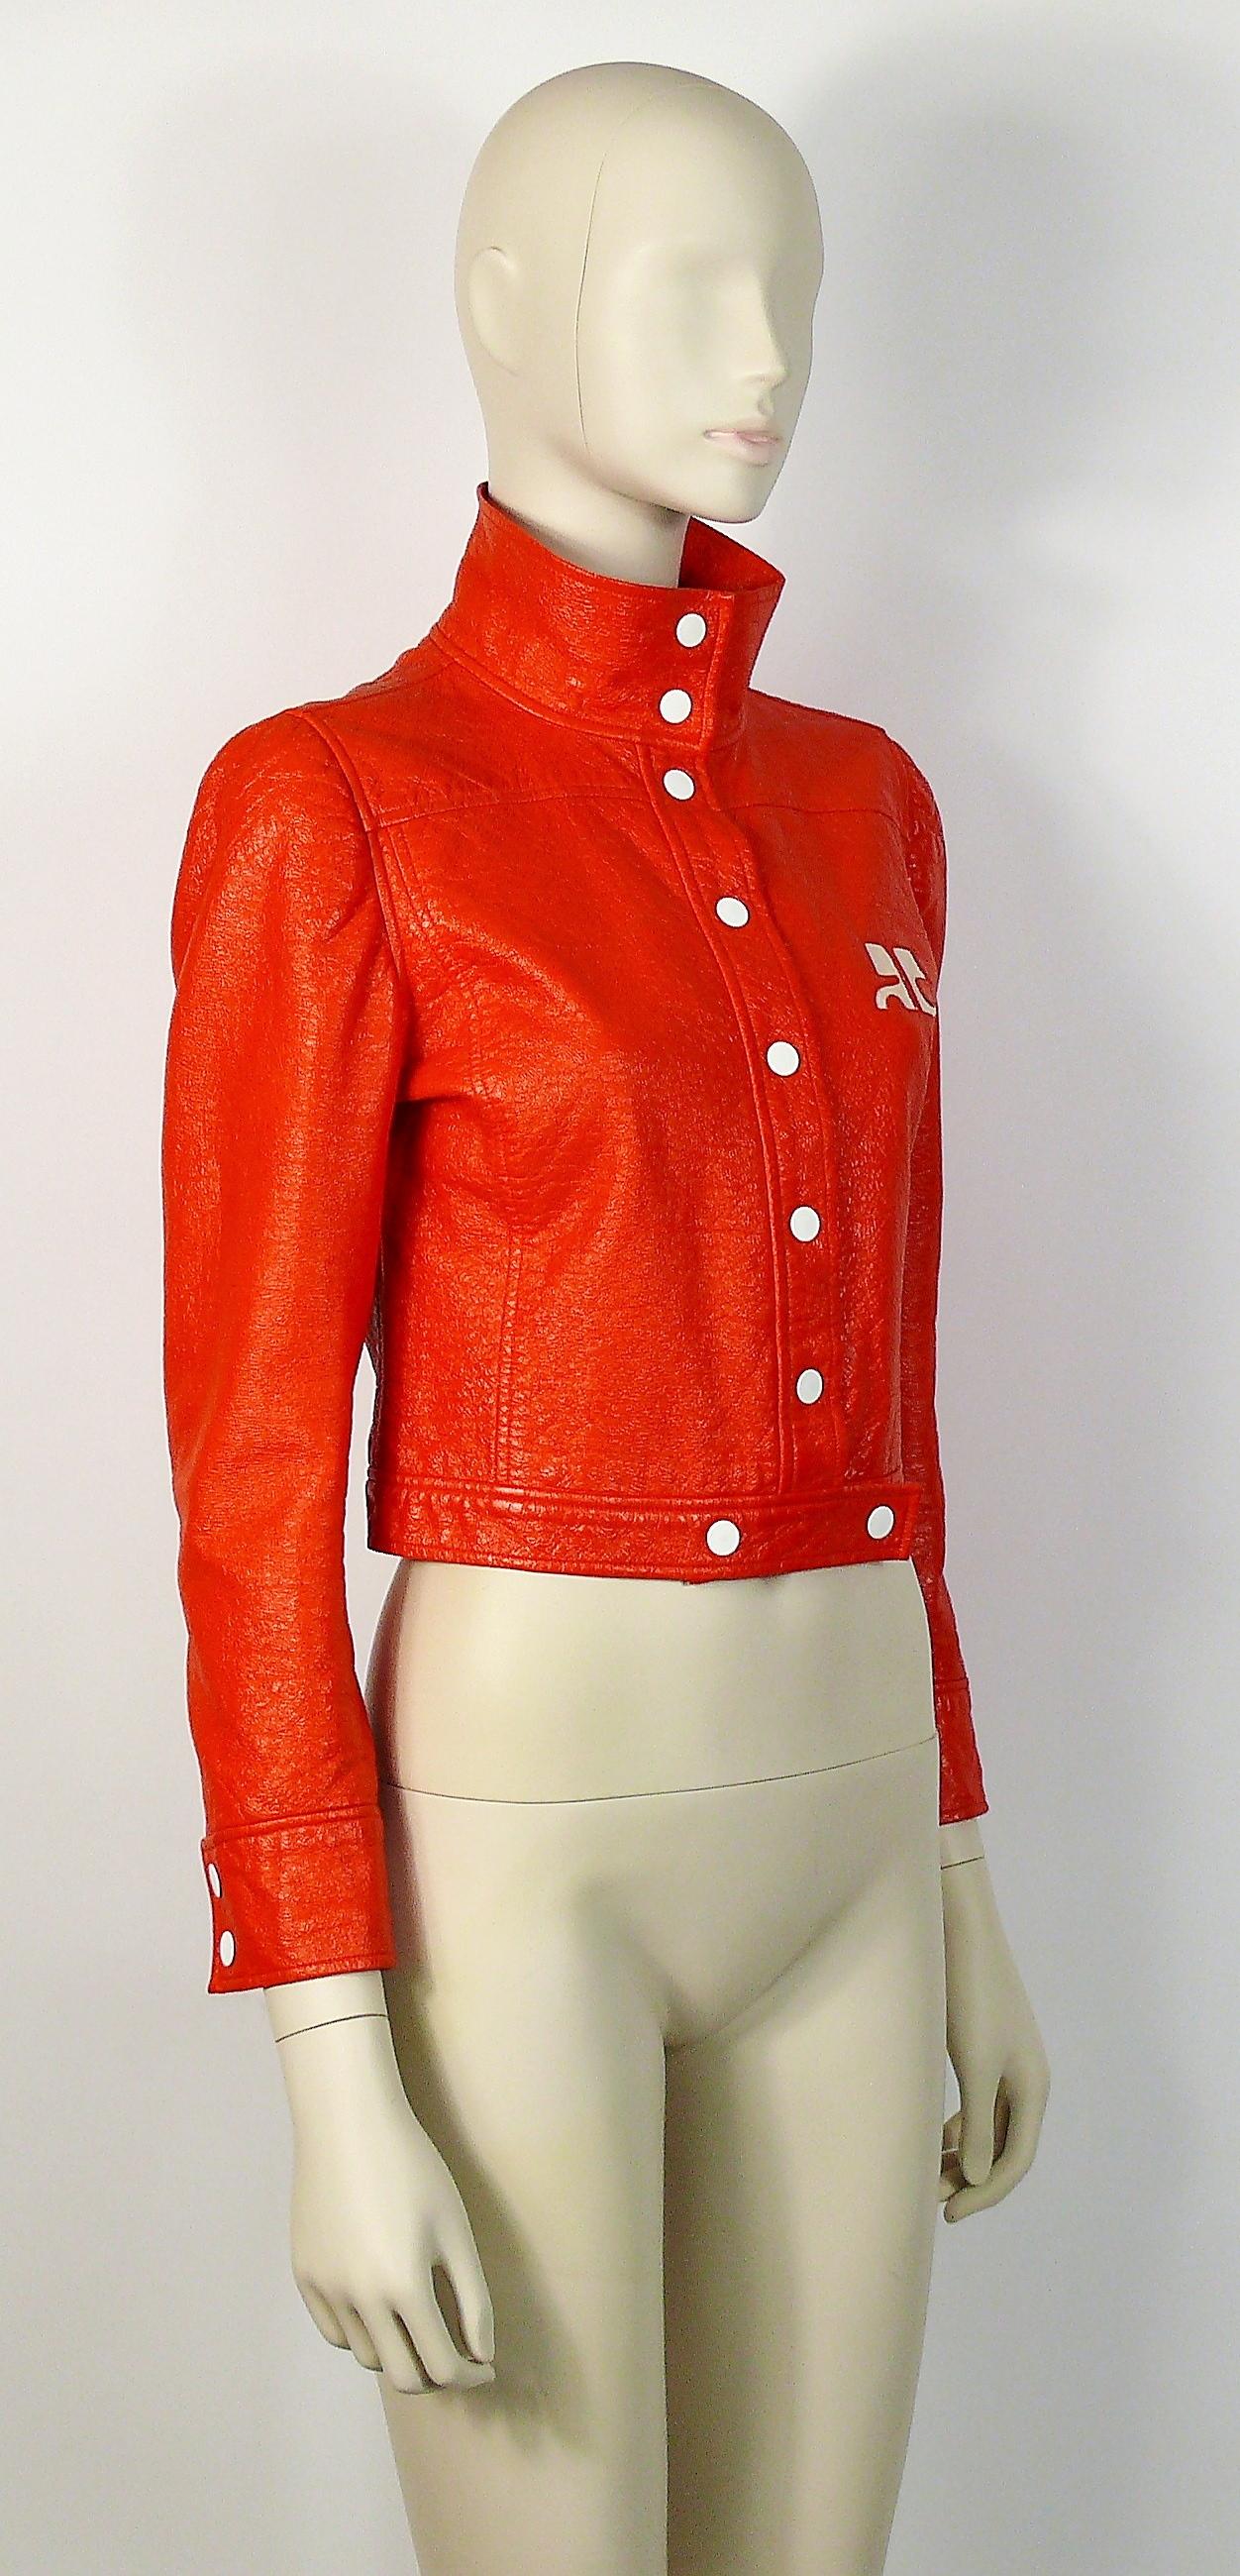 ANDRE COURREGES vintage orange vinyl jacket featuring a front signature logo.

This jacket features :
- Iconic COURREGE orange color vinyl.
- Cropped length.
- Stand collar.
- White metal snap buttons down the front, waist and cuffs.
- Fully lined